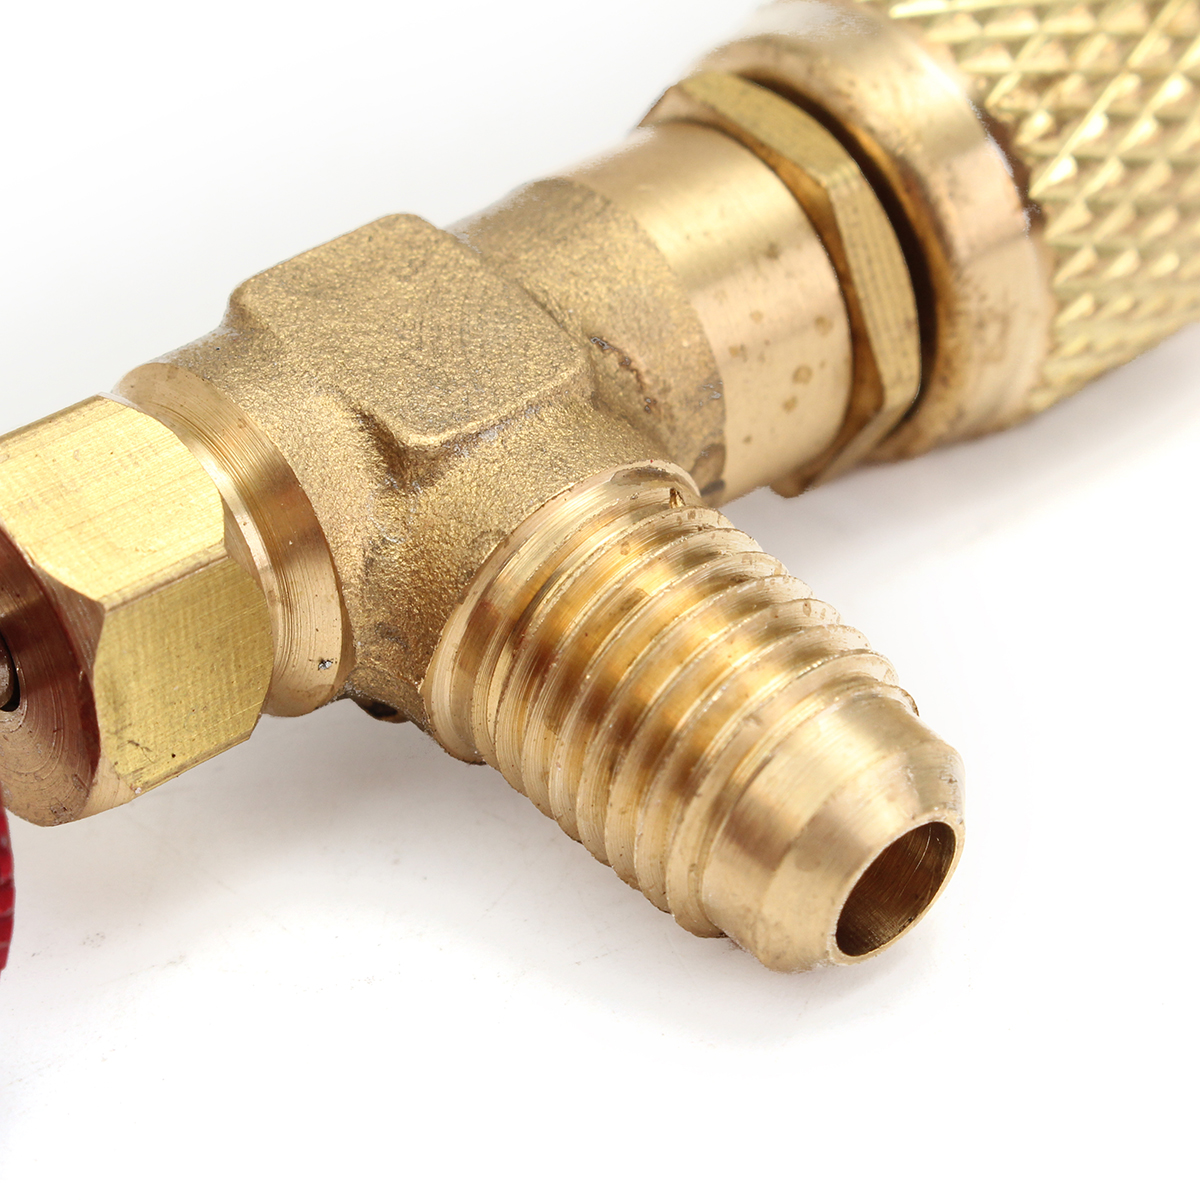 R410A-AC-Copper-Flow-Control-Valve-Adapter-14-to-516-for-Refrigerant-Charging-Hose-1387555